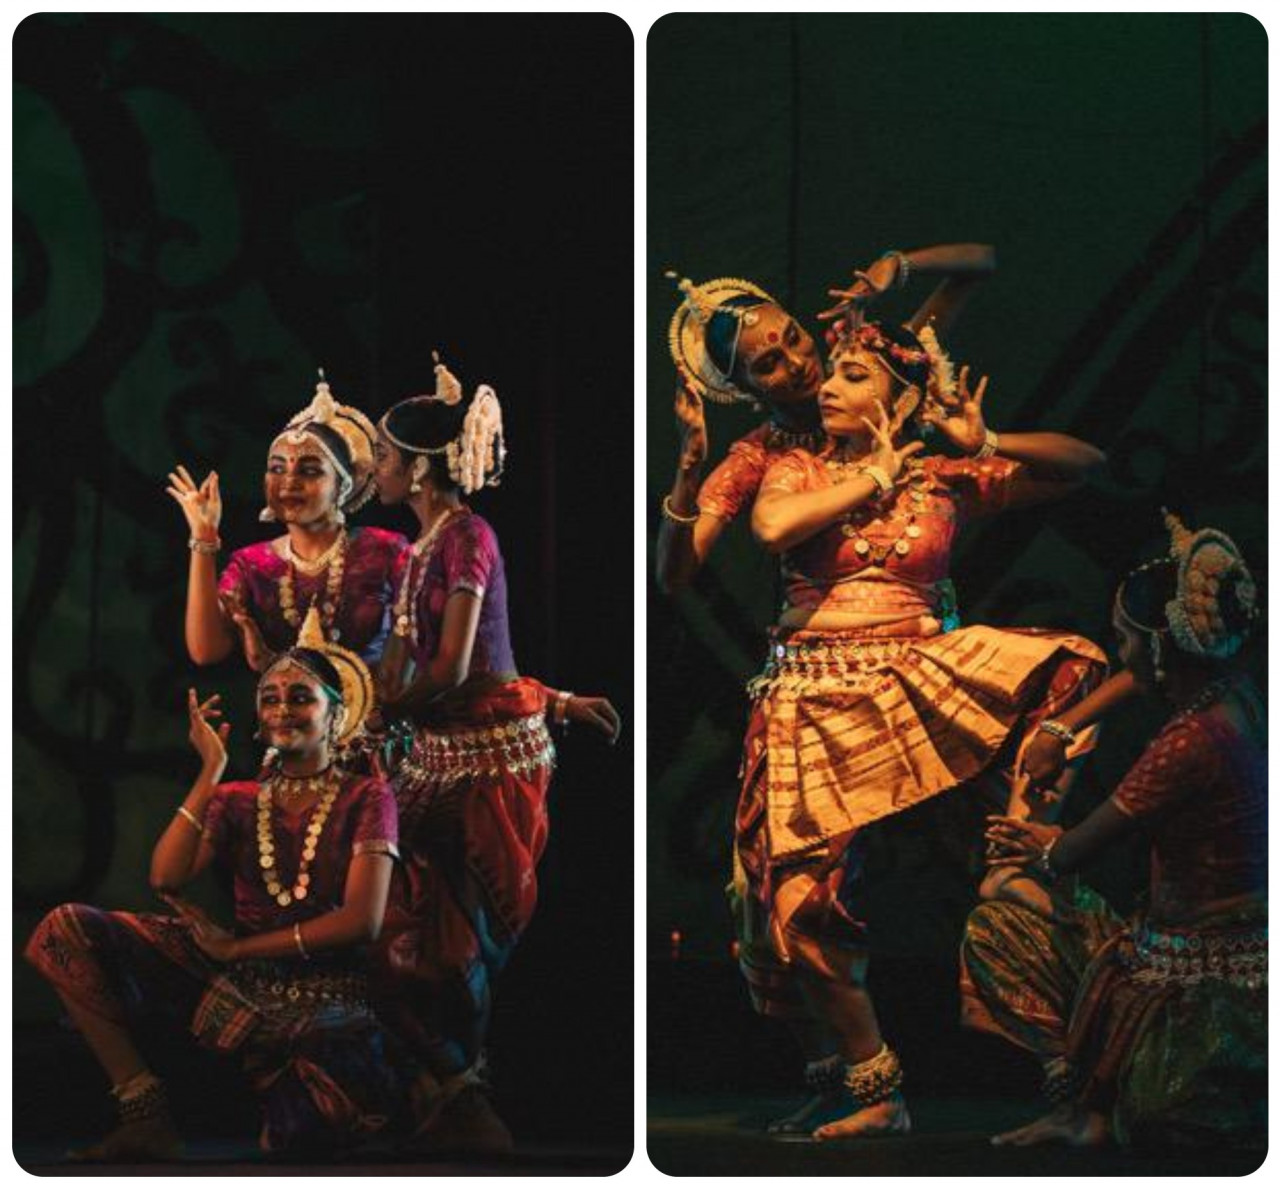 The lyrical aspect that Triple Frontiers uphold gracefully embodies the religion/spiritualism, philosophy, and mythology behind Odissi. — Pic courtesy of Sutra Dance Theatre/S Magendran